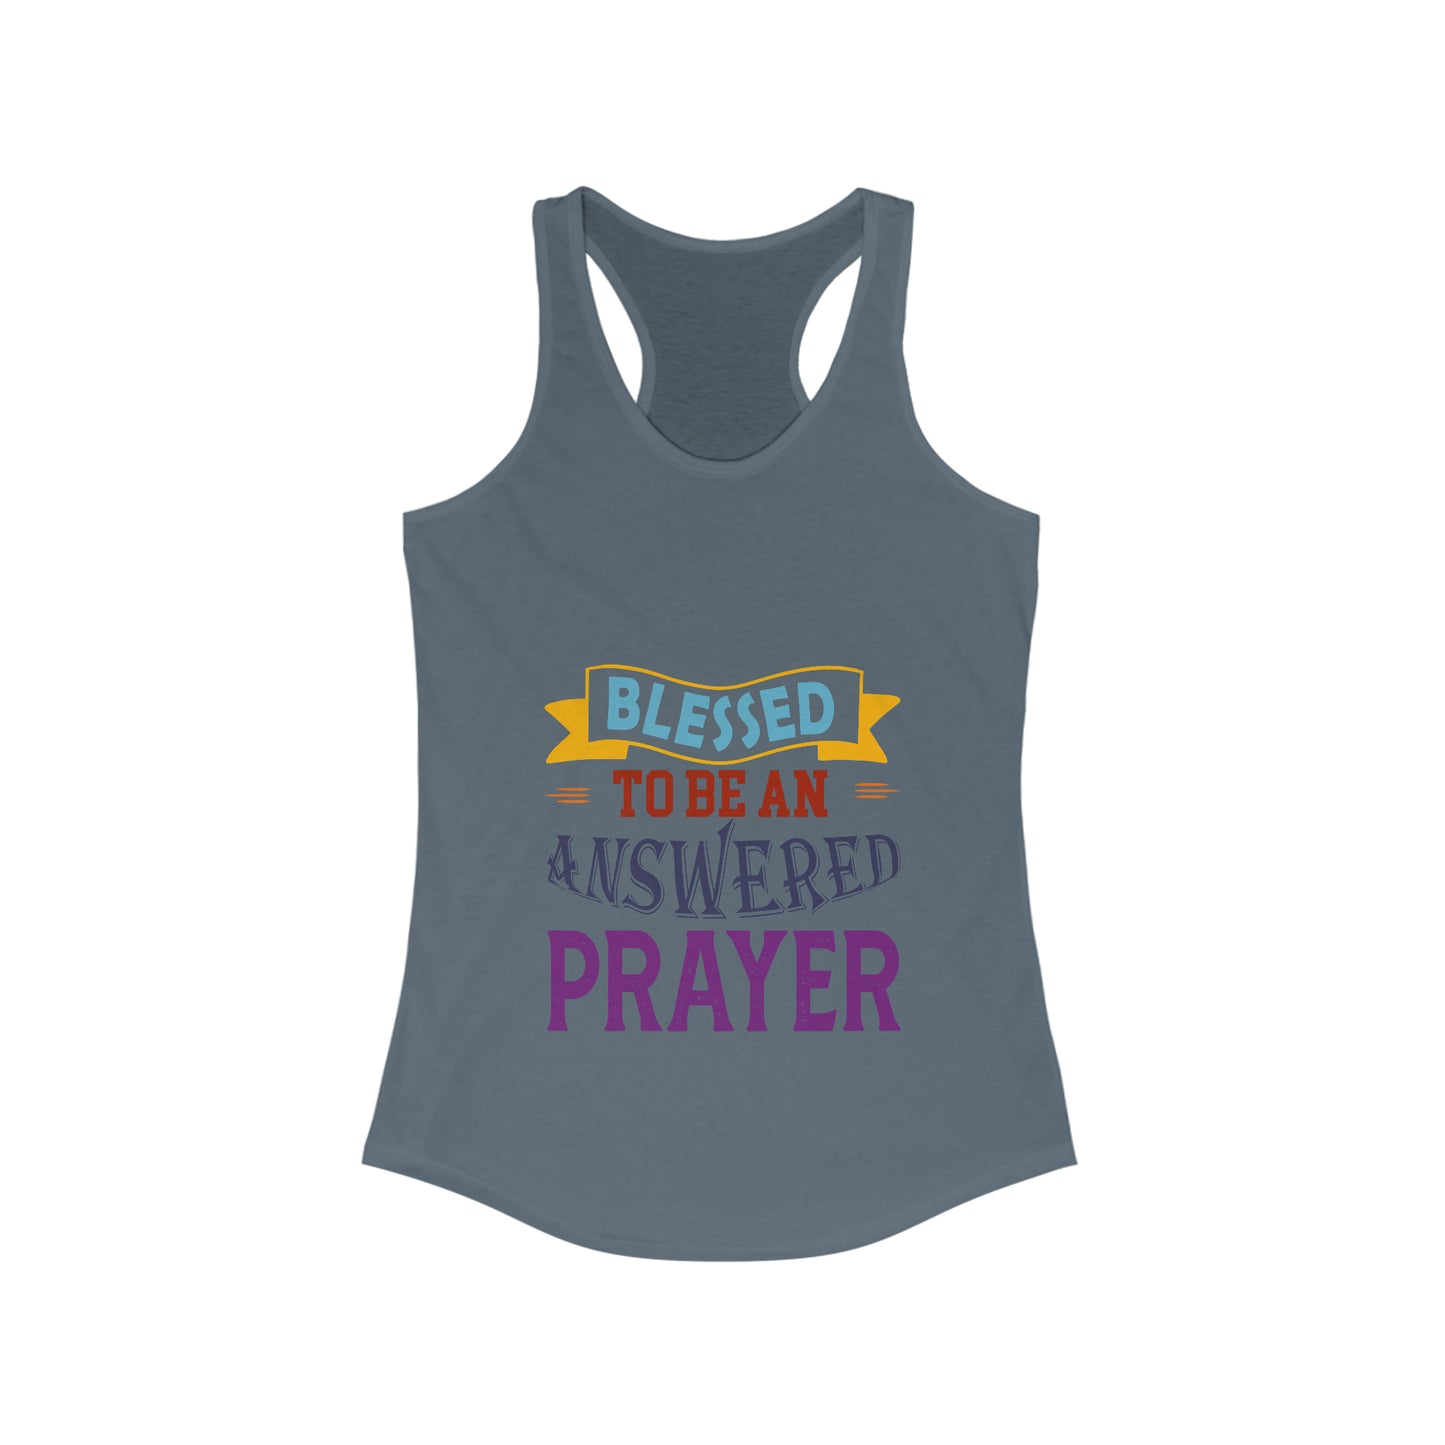 Blessed To Be An Answered Prayer Women’s Slim fit tank-top